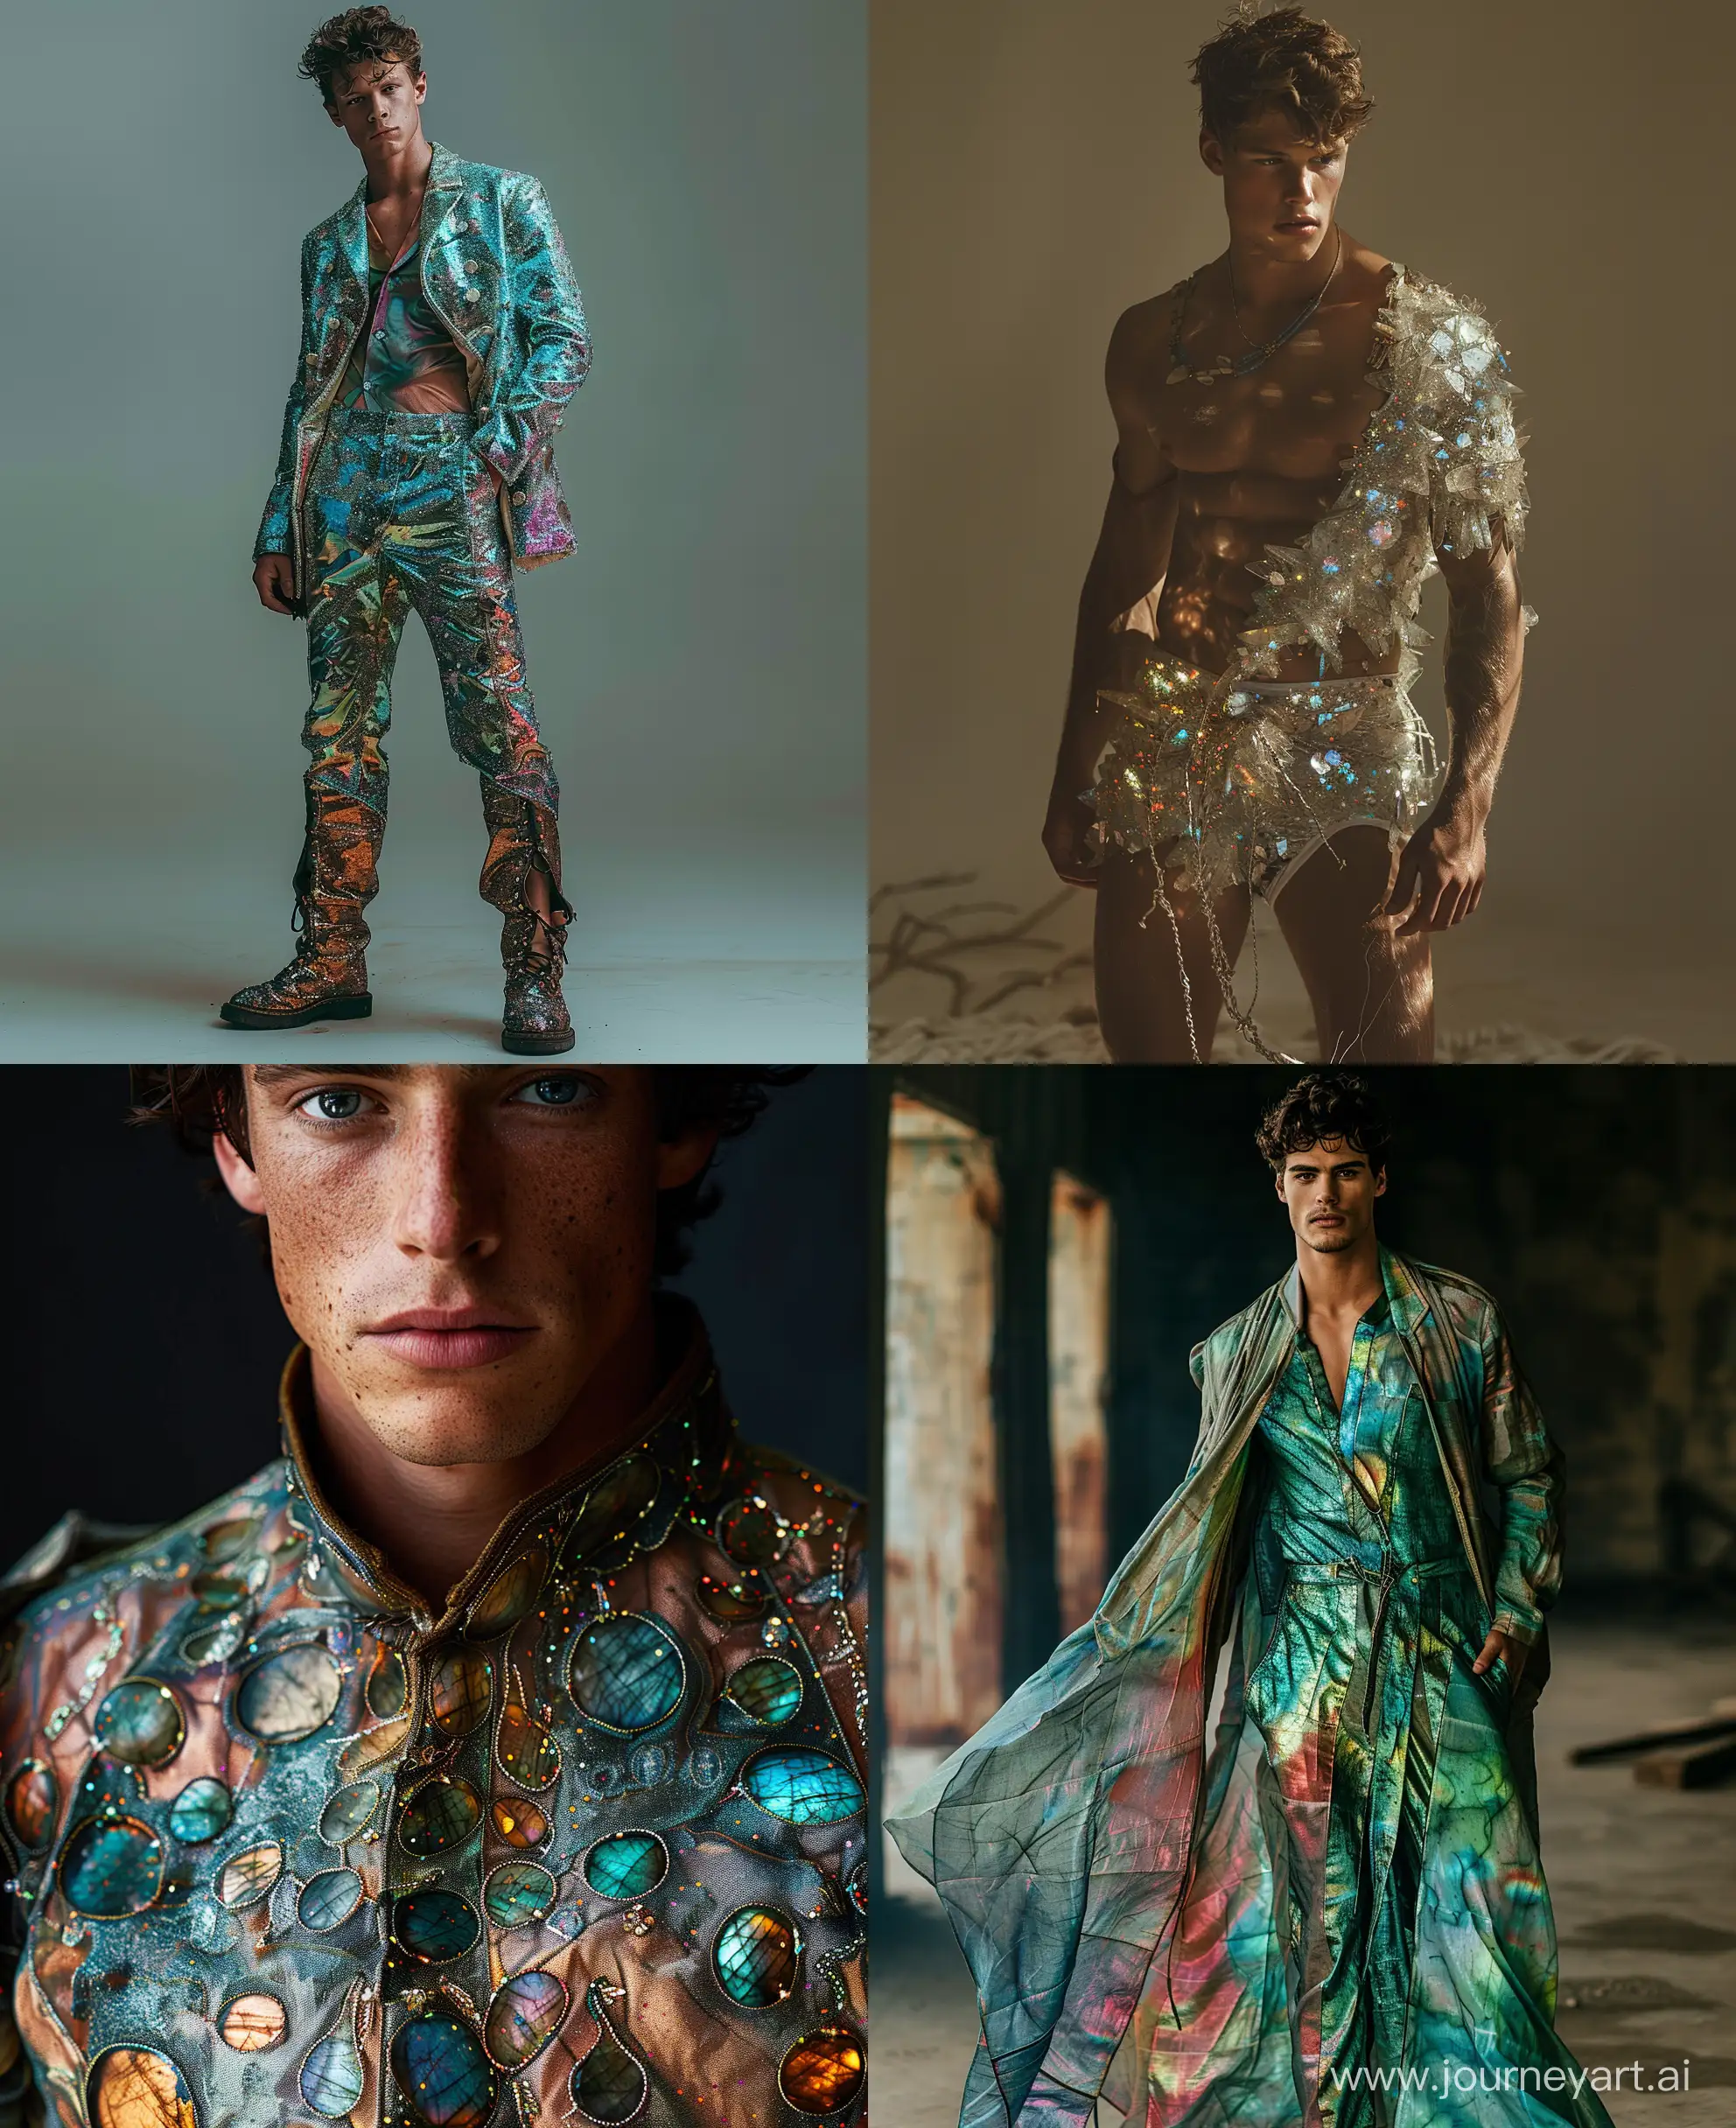 Mysterious-Nocturnal-Fashion-Portrait-Man-in-Crystal-Labradorite-Outfit